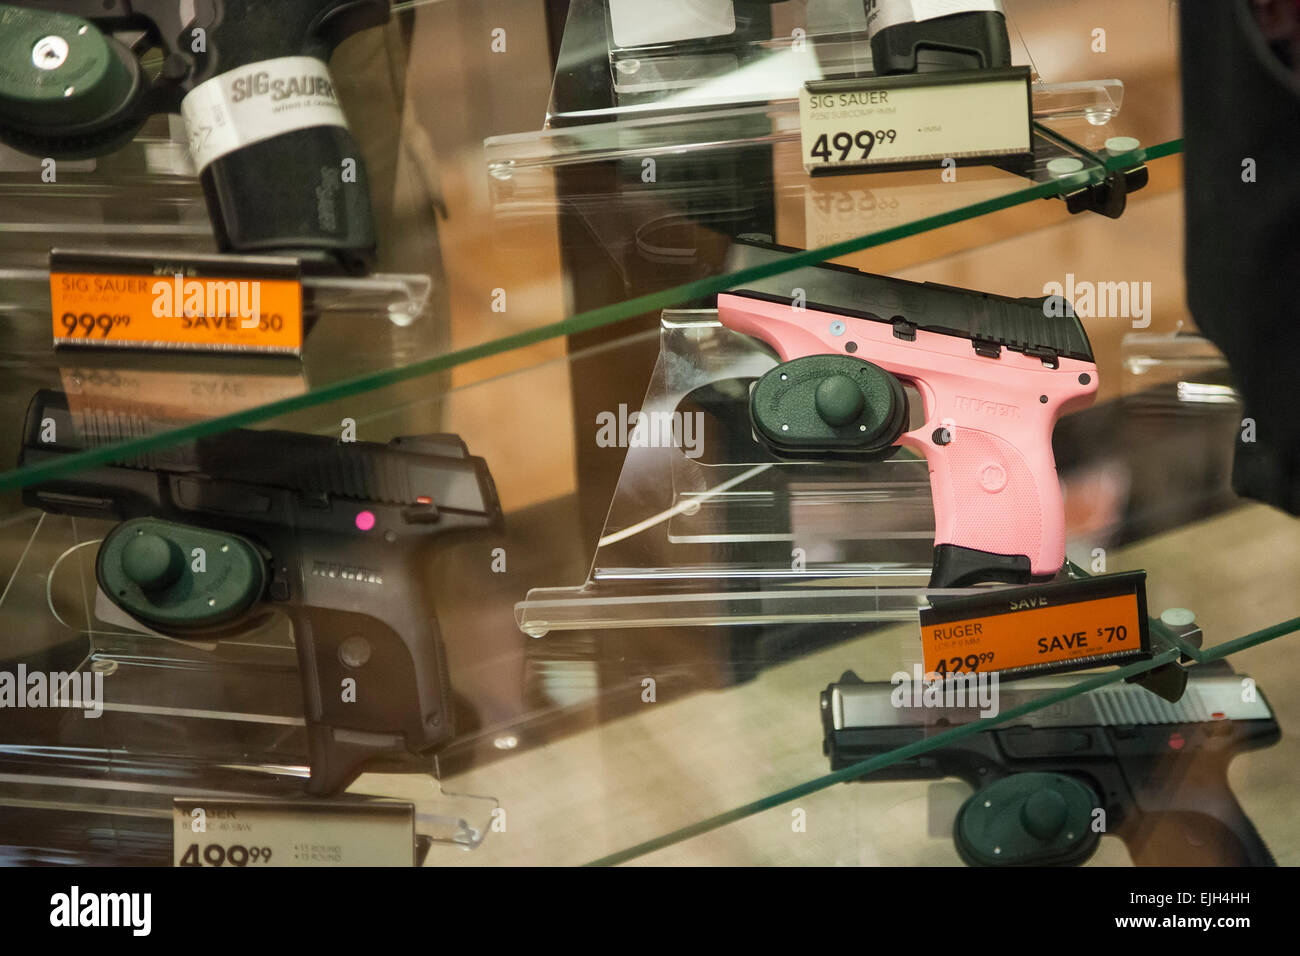 Troy, Michigan - A pink Ruger handgun designed for women on sale at the Field & Steam outdoors store. Stock Photo